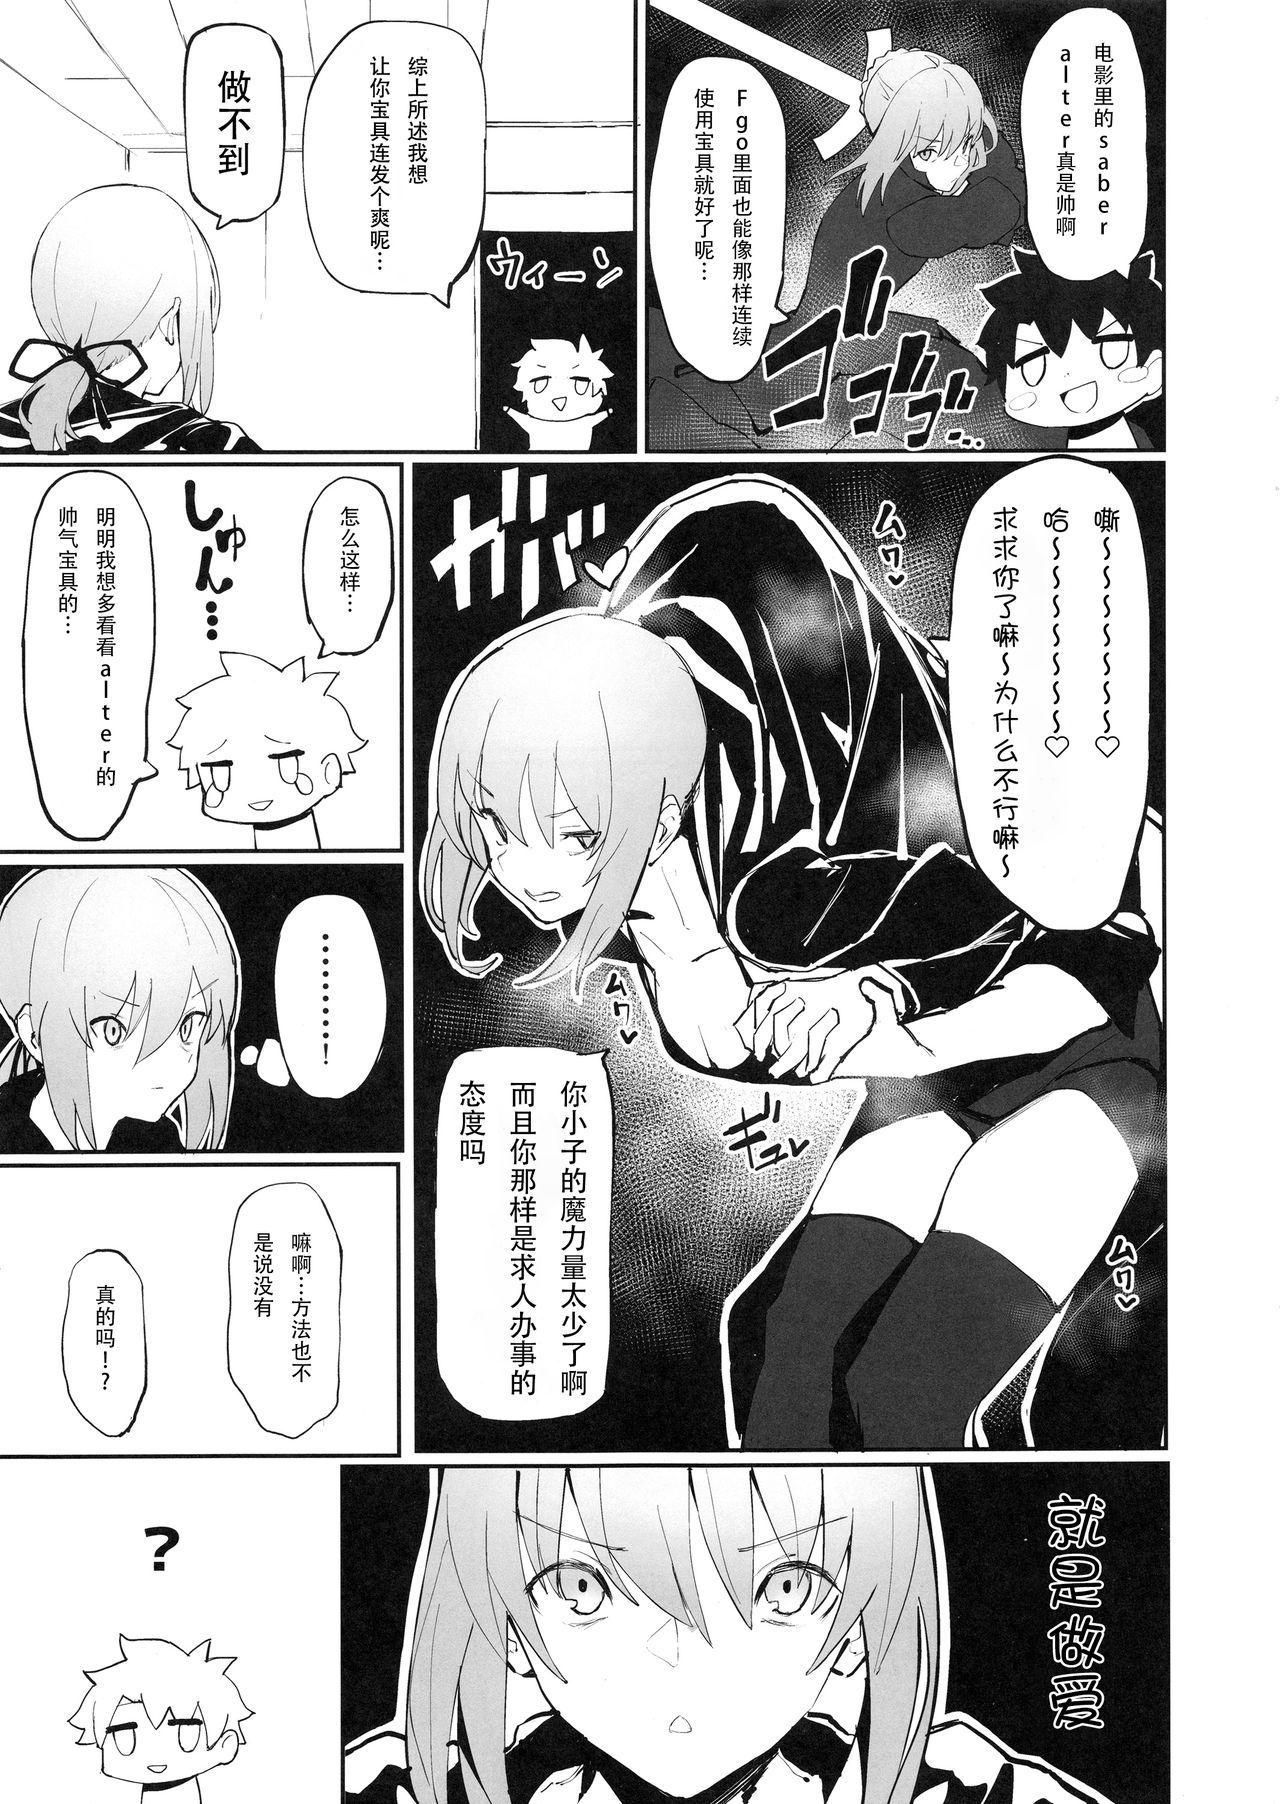 Women Sucking Dick Saber Alter to Maryoku Kyoukyuu | 和saber alter的魔力供给♡ - Fate grand order Making Love Porn - Page 2